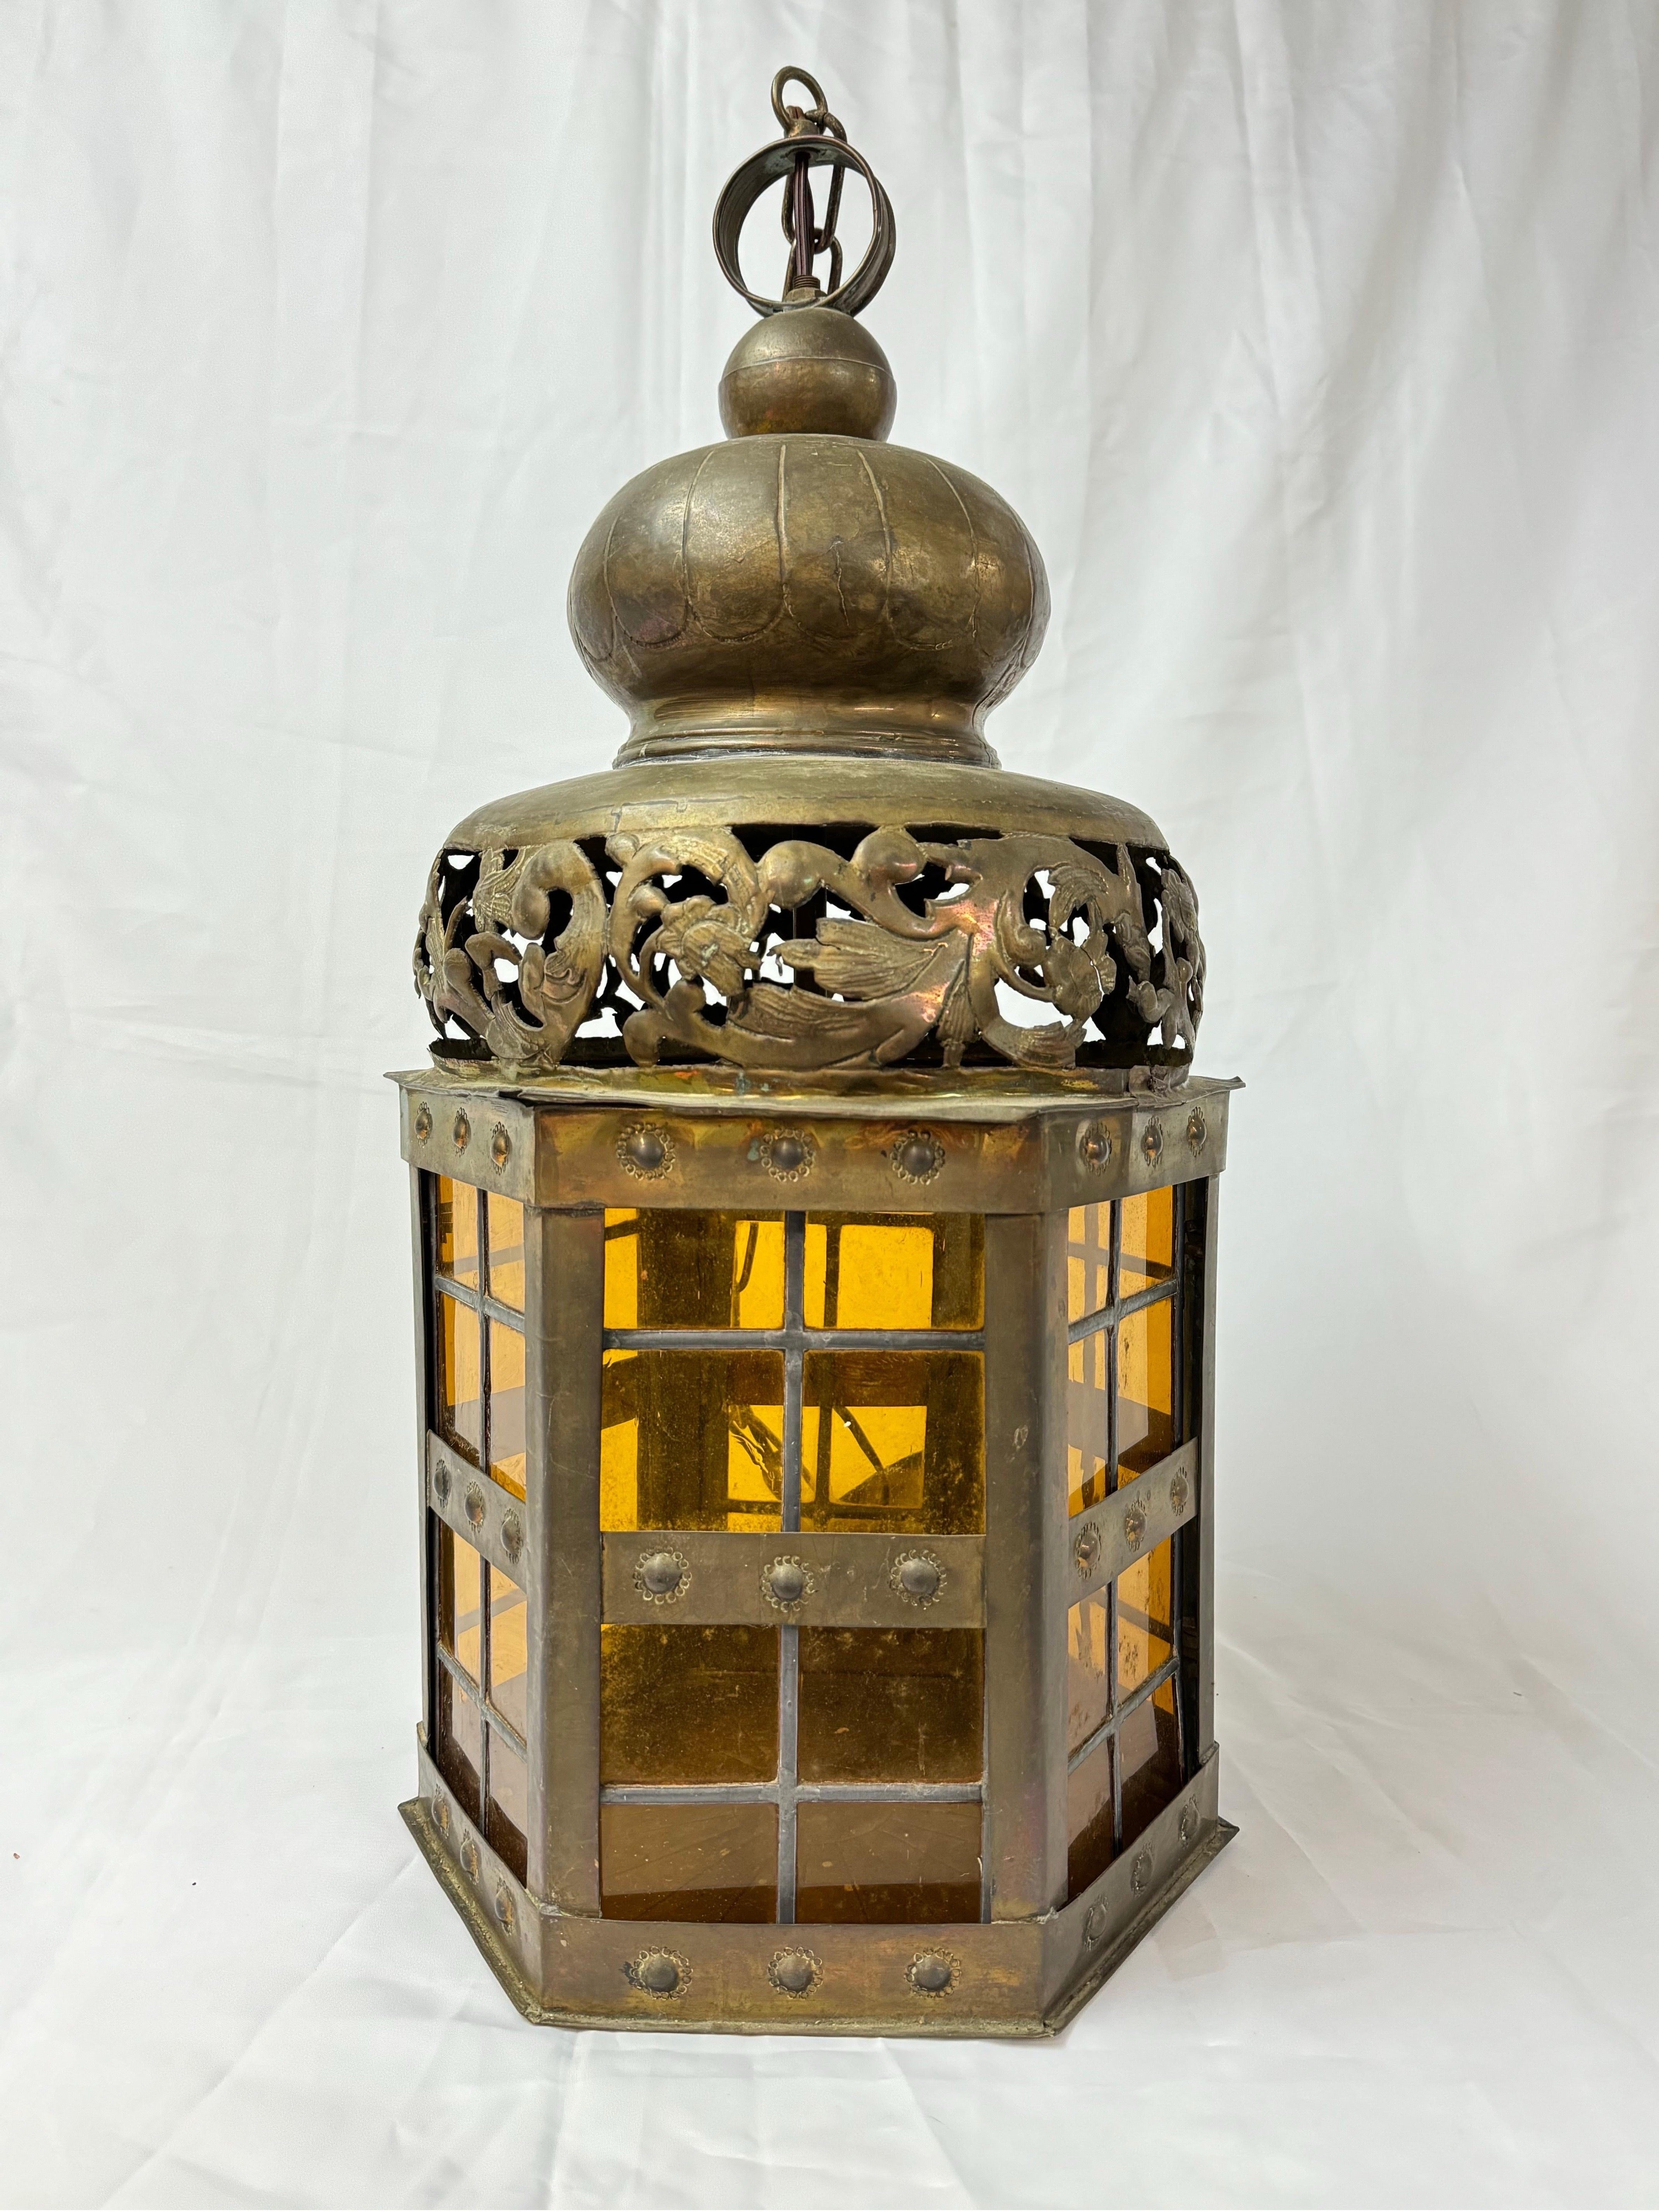 Pierced Moroccan Brass Lantern Style Chandelier. Golden yellow leaded glass windows adorn this beauty. Pierced decorations surround the bulbous top. Stamped designs decorate the exterior brass. Perfect example of unique and romantic lighting.
This